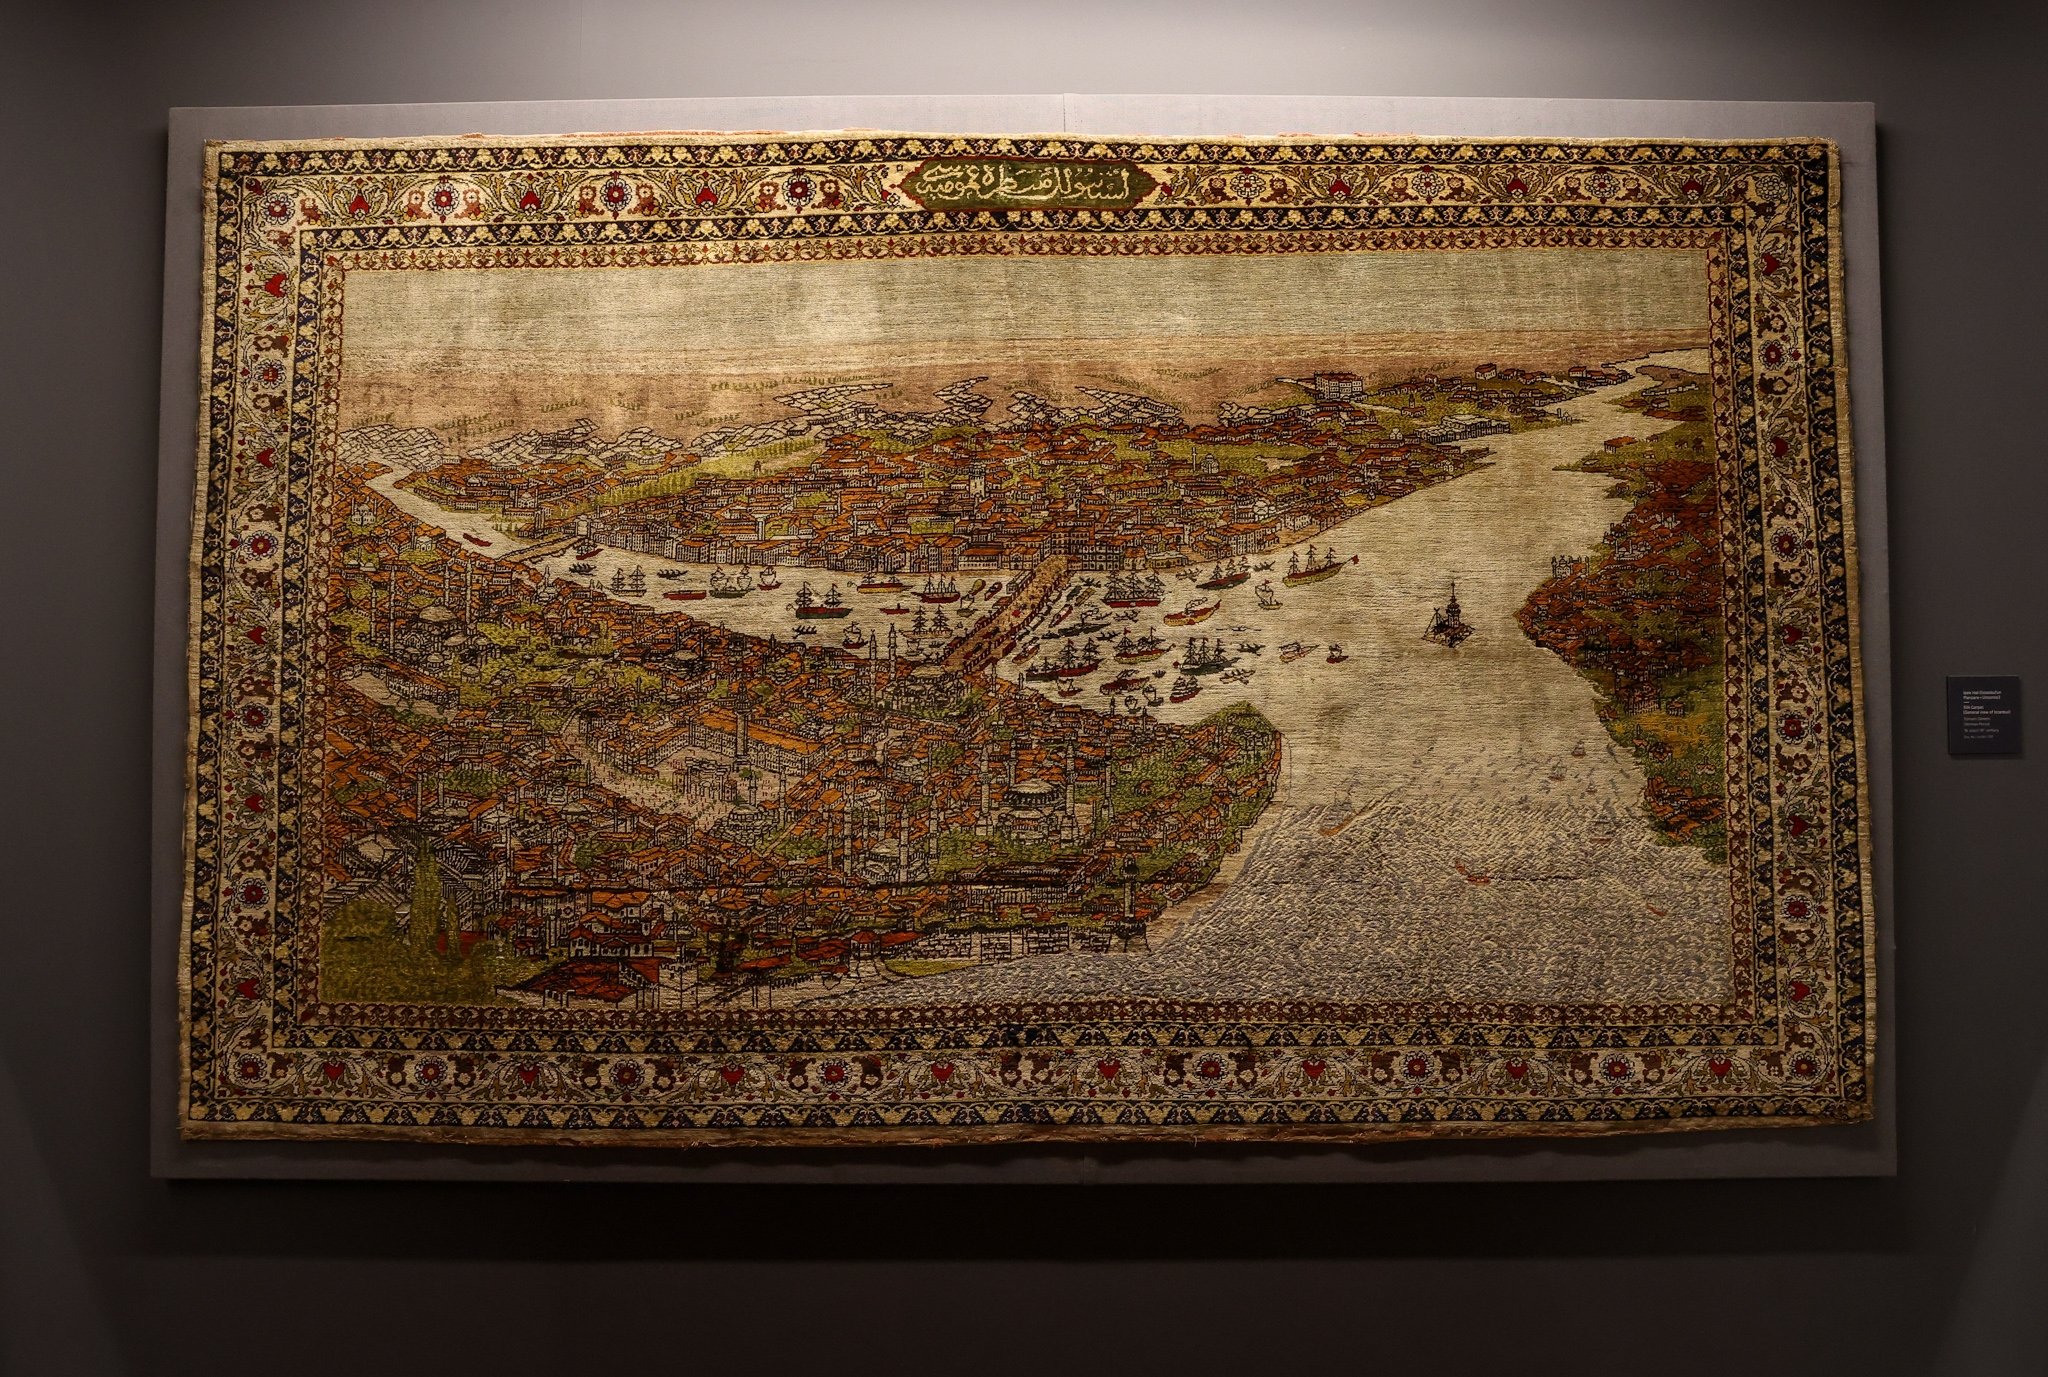 An ancient carpet decorated with a depiction of the conquest of Istanbul in 1453 is on display at the Turkish and Islamic Arts Museum in Istanbul, Turkey, April 26, 2021. (AA Photo)